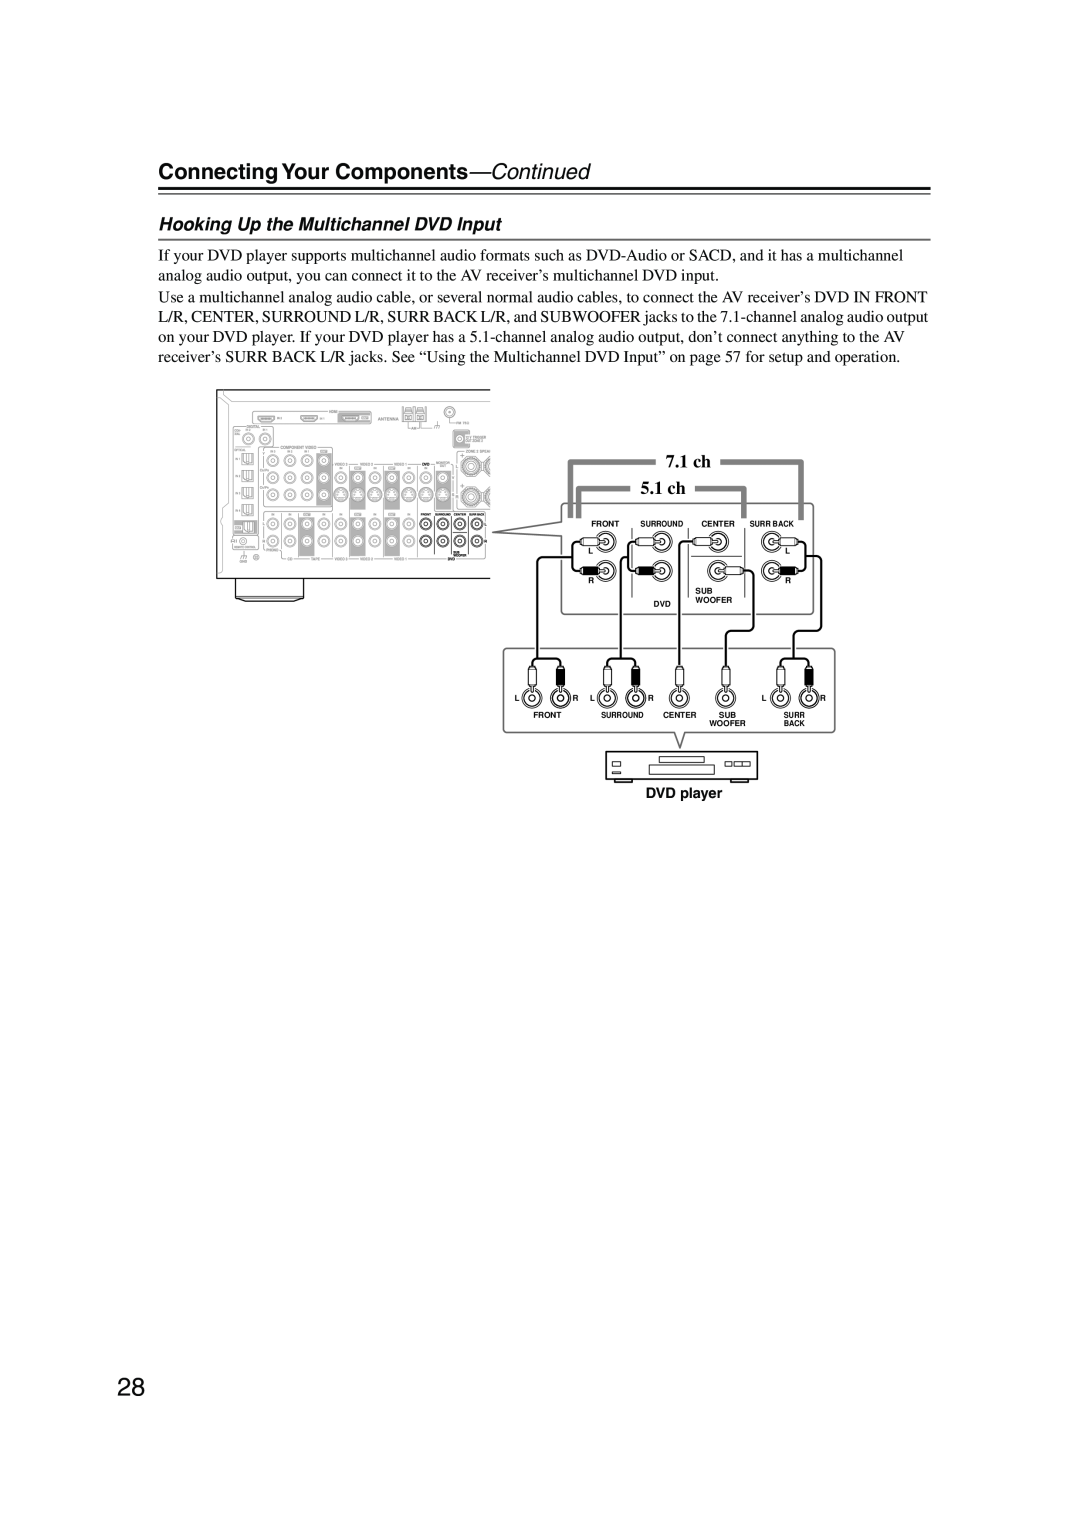 Onkyo SR804 instruction manual Hooking Up the Multichannel DVD Input, 7.1 ch, 5.1 ch, Connecting Your Components—Continued 